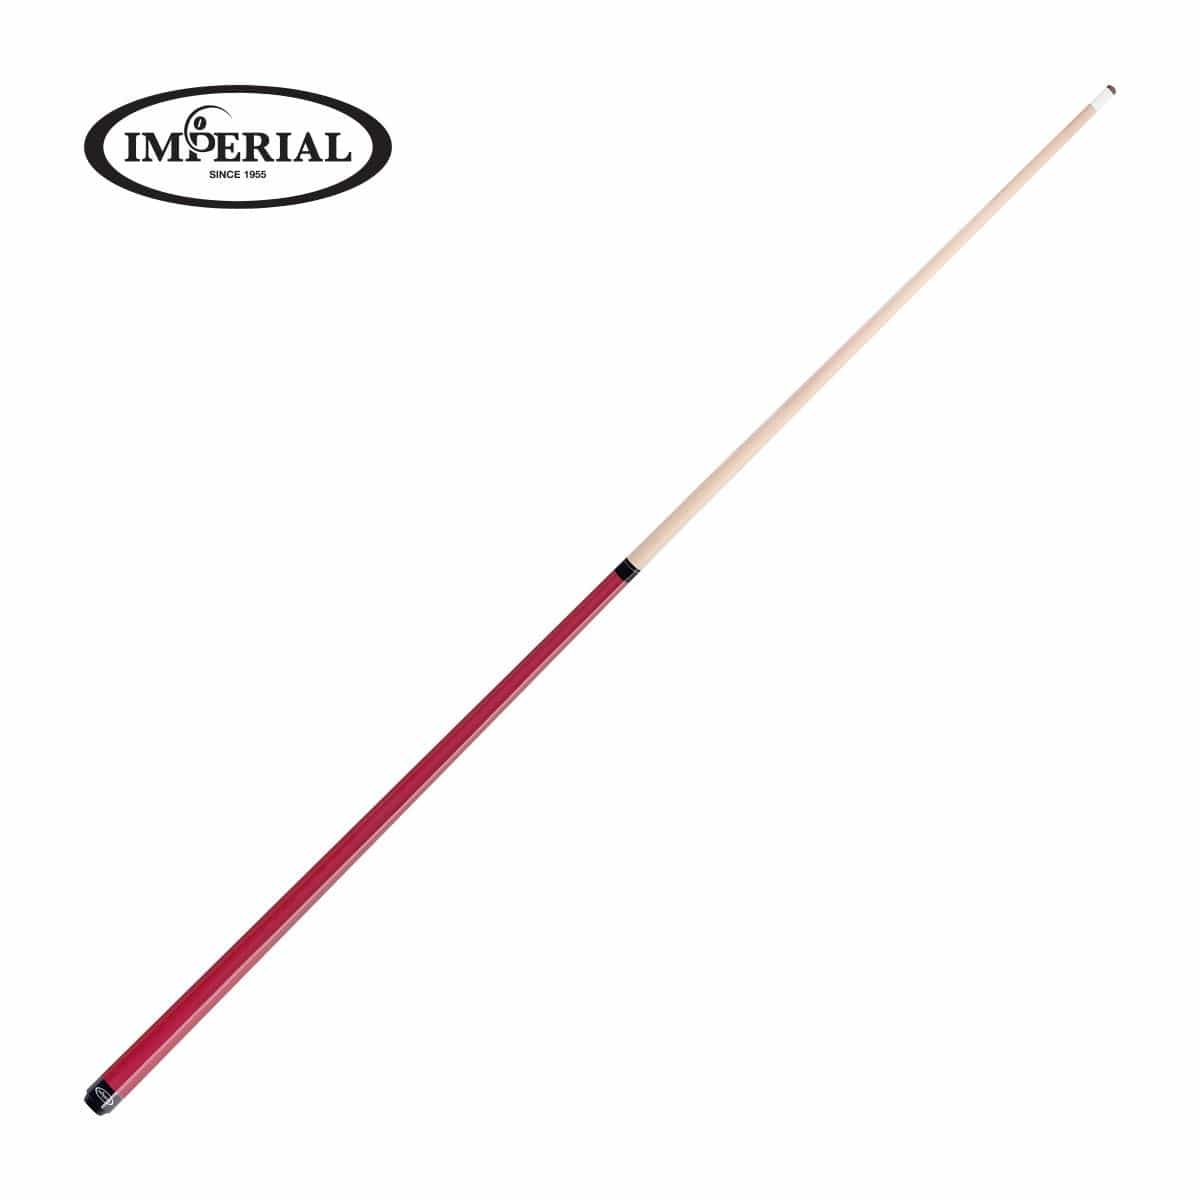 Imperial Billiards Accessories Imperial - Vision Series Red Cue - No Wrap* - 13-754-NW